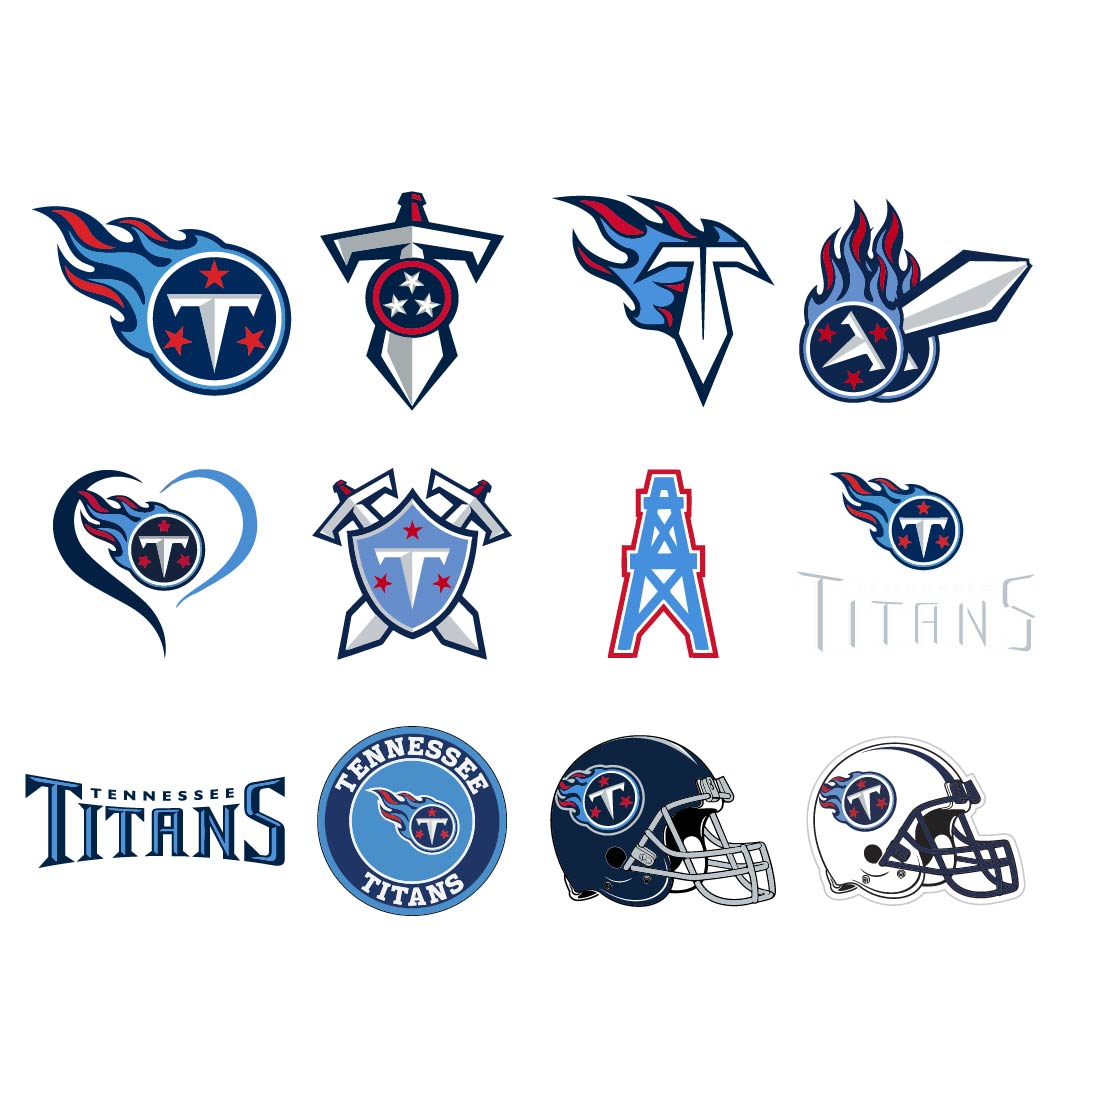 Tennessee Titans Logo vector - Tennessee Titans Svg - Titans Football Logo - Titans Nfl Logo - Tennessee Oilers Logo - Tennessee Titans Logo Png preview image.